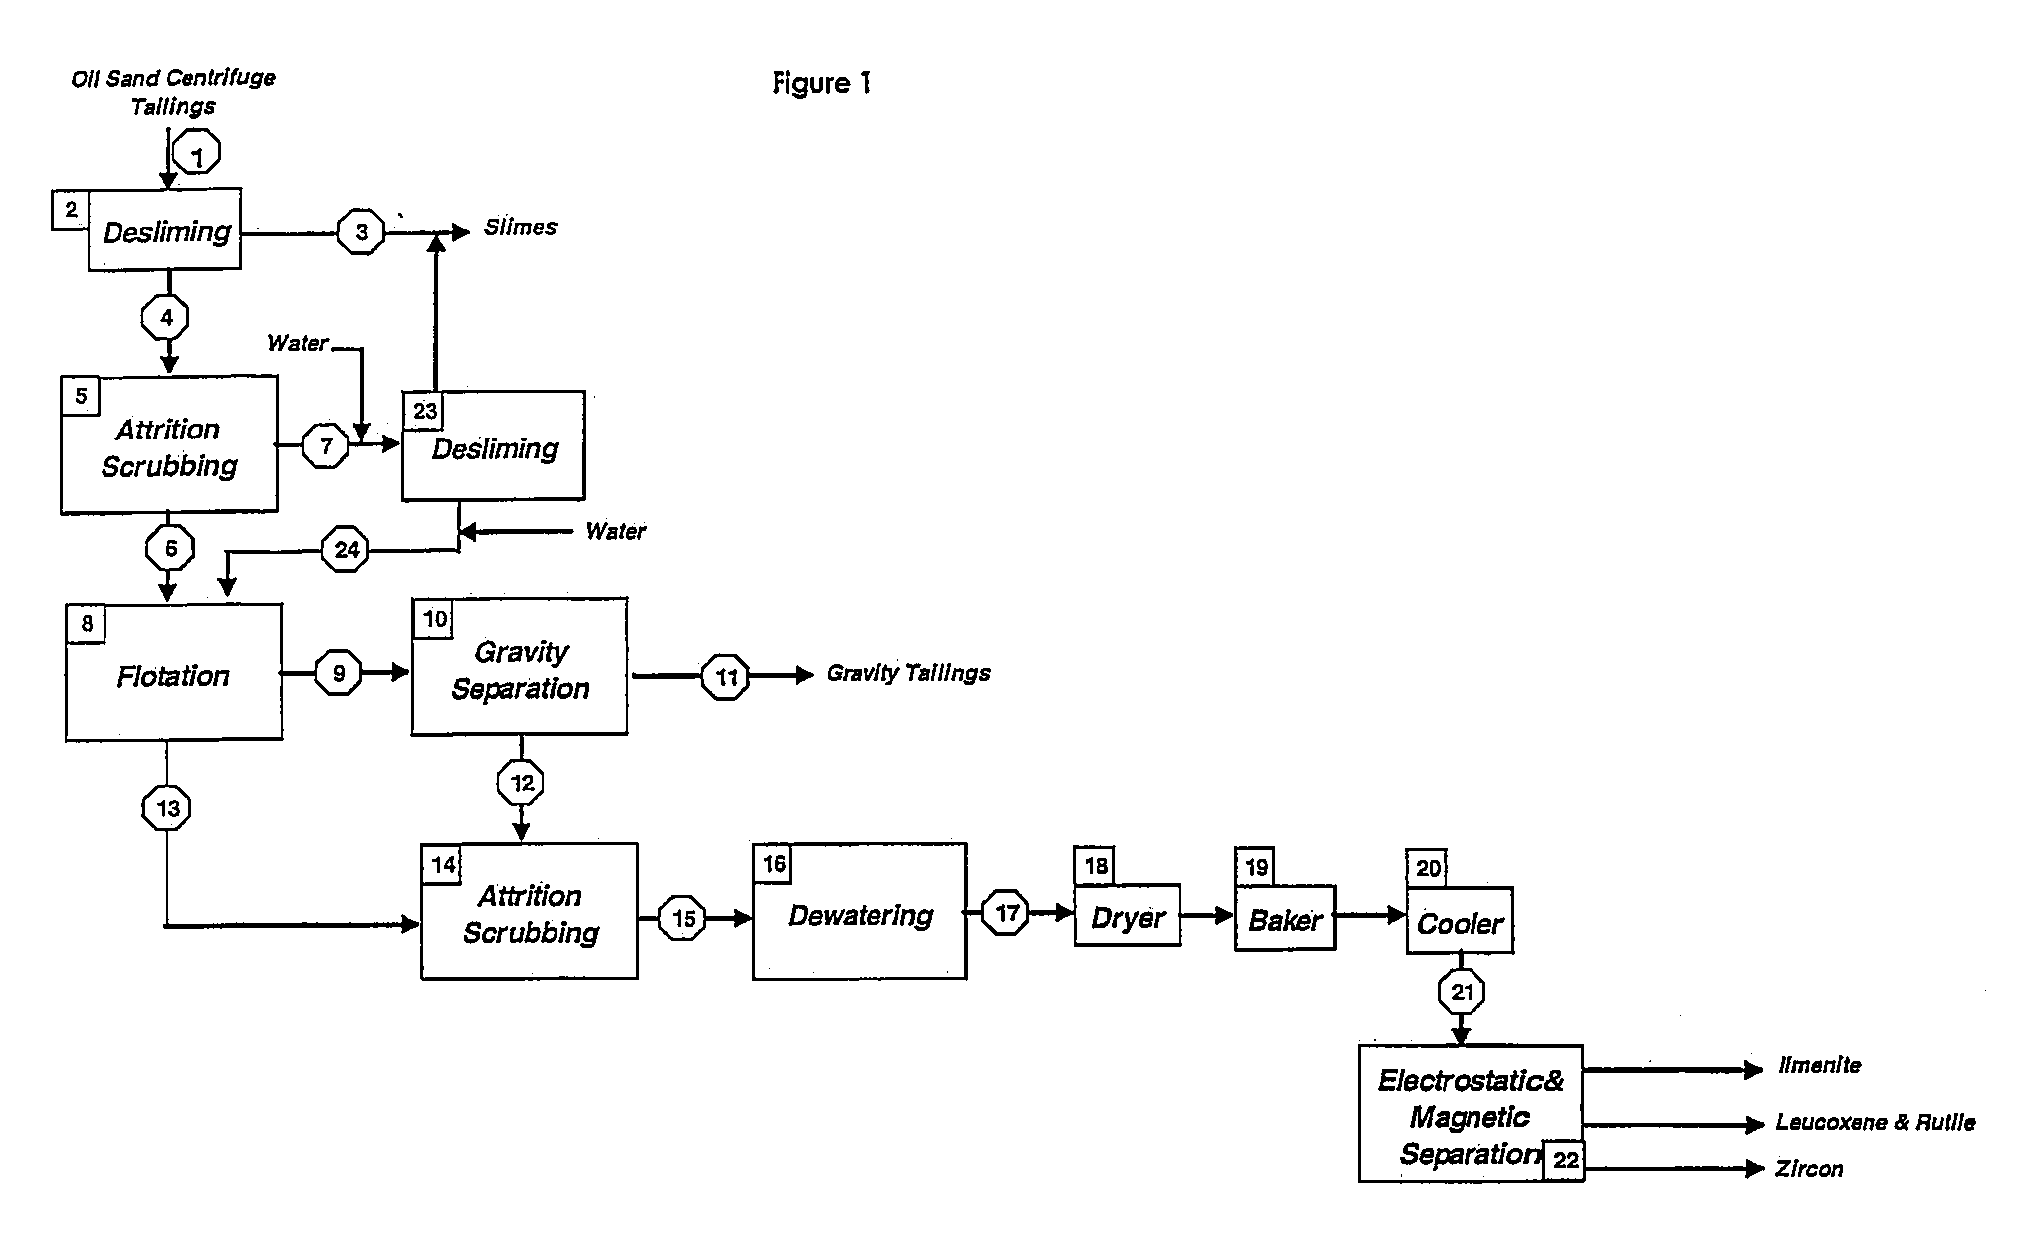 Process for recovering heavy minerals from oil sand tailings